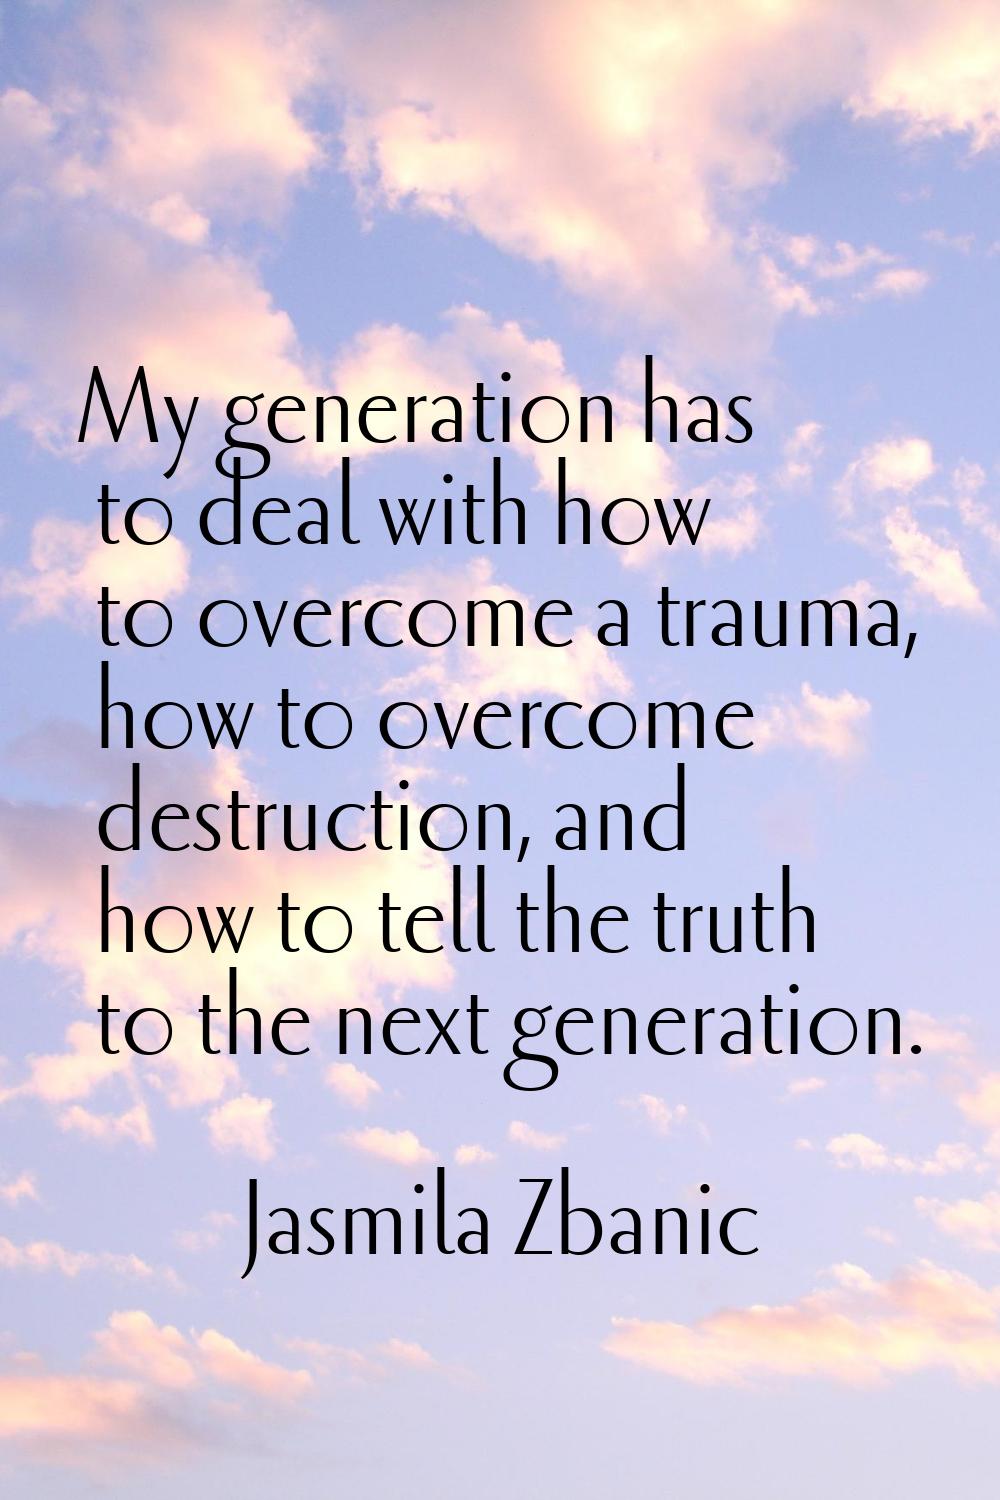 My generation has to deal with how to overcome a trauma, how to overcome destruction, and how to te